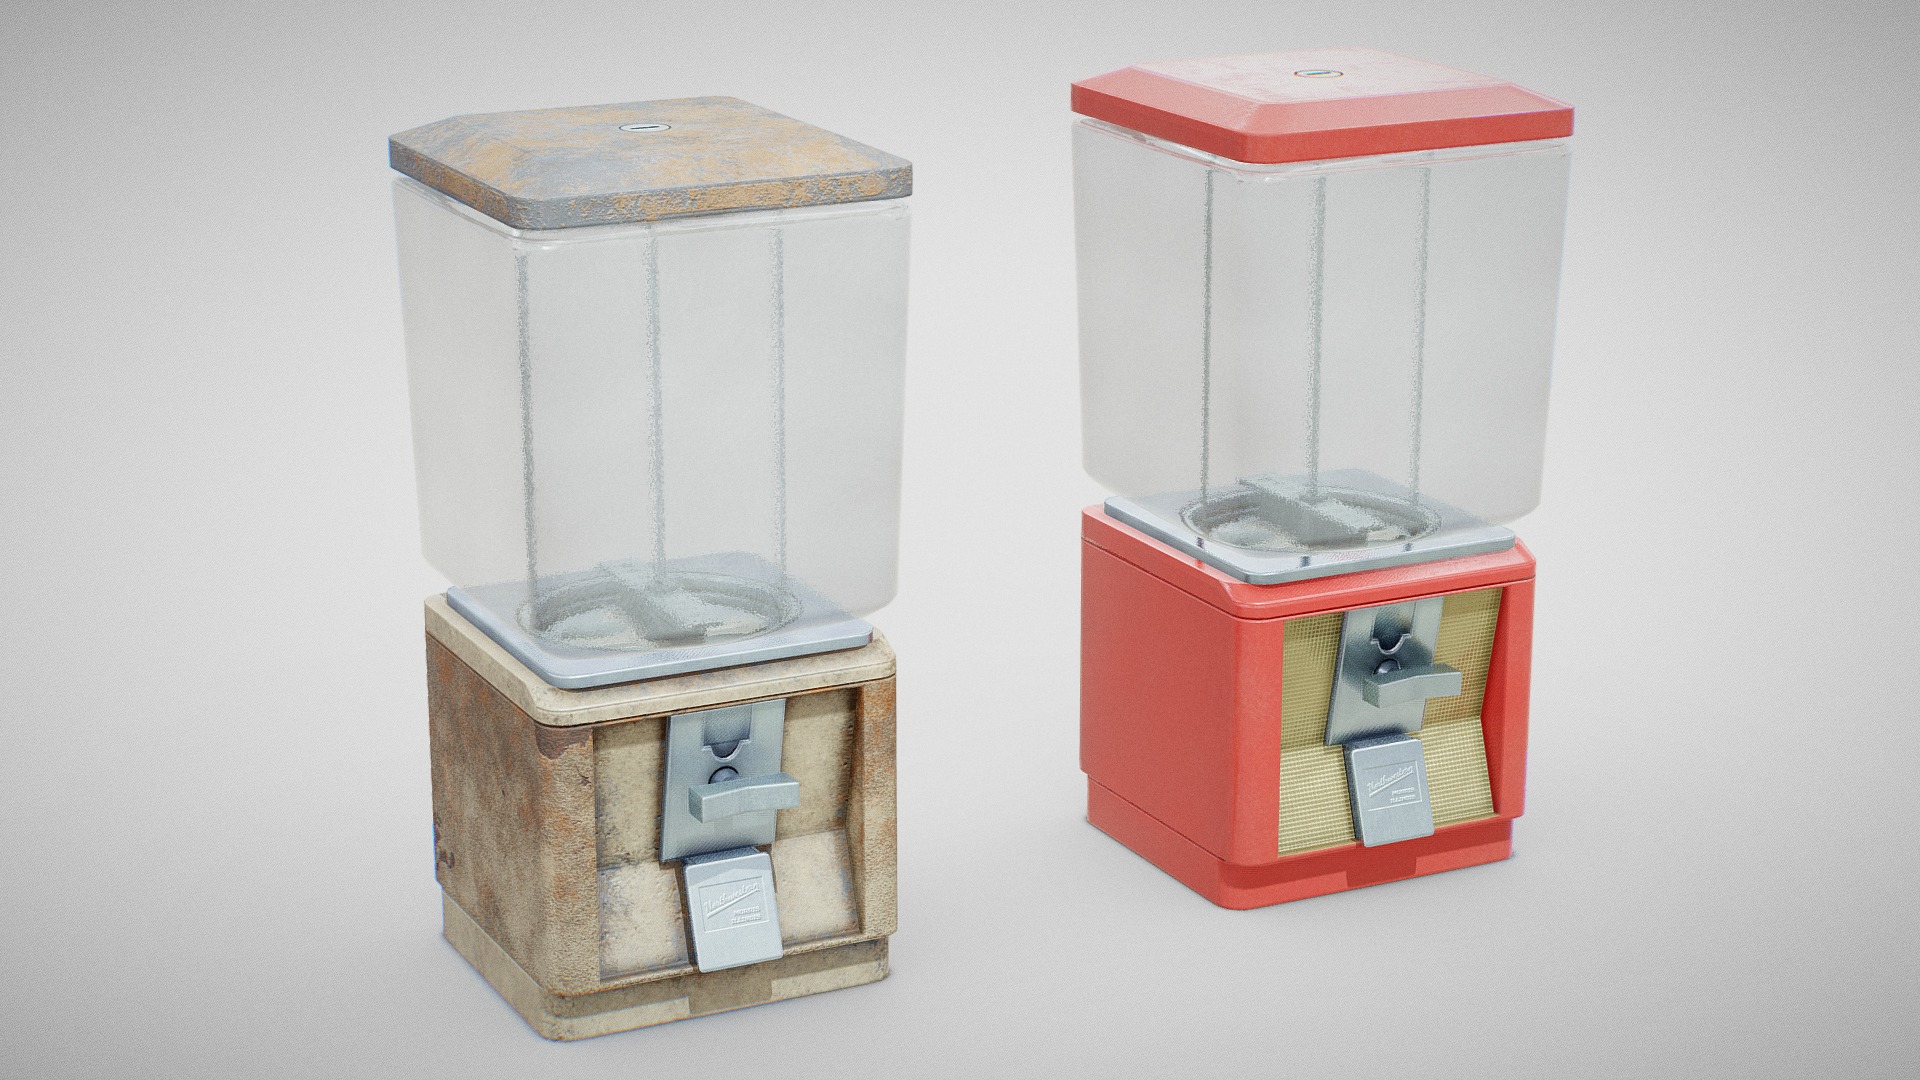 3D model Candy Machine – Model 60 (New & Rusty) - This is a 3D model of the Candy Machine - Model 60 (New & Rusty). The 3D model is about a few wooden boxes.